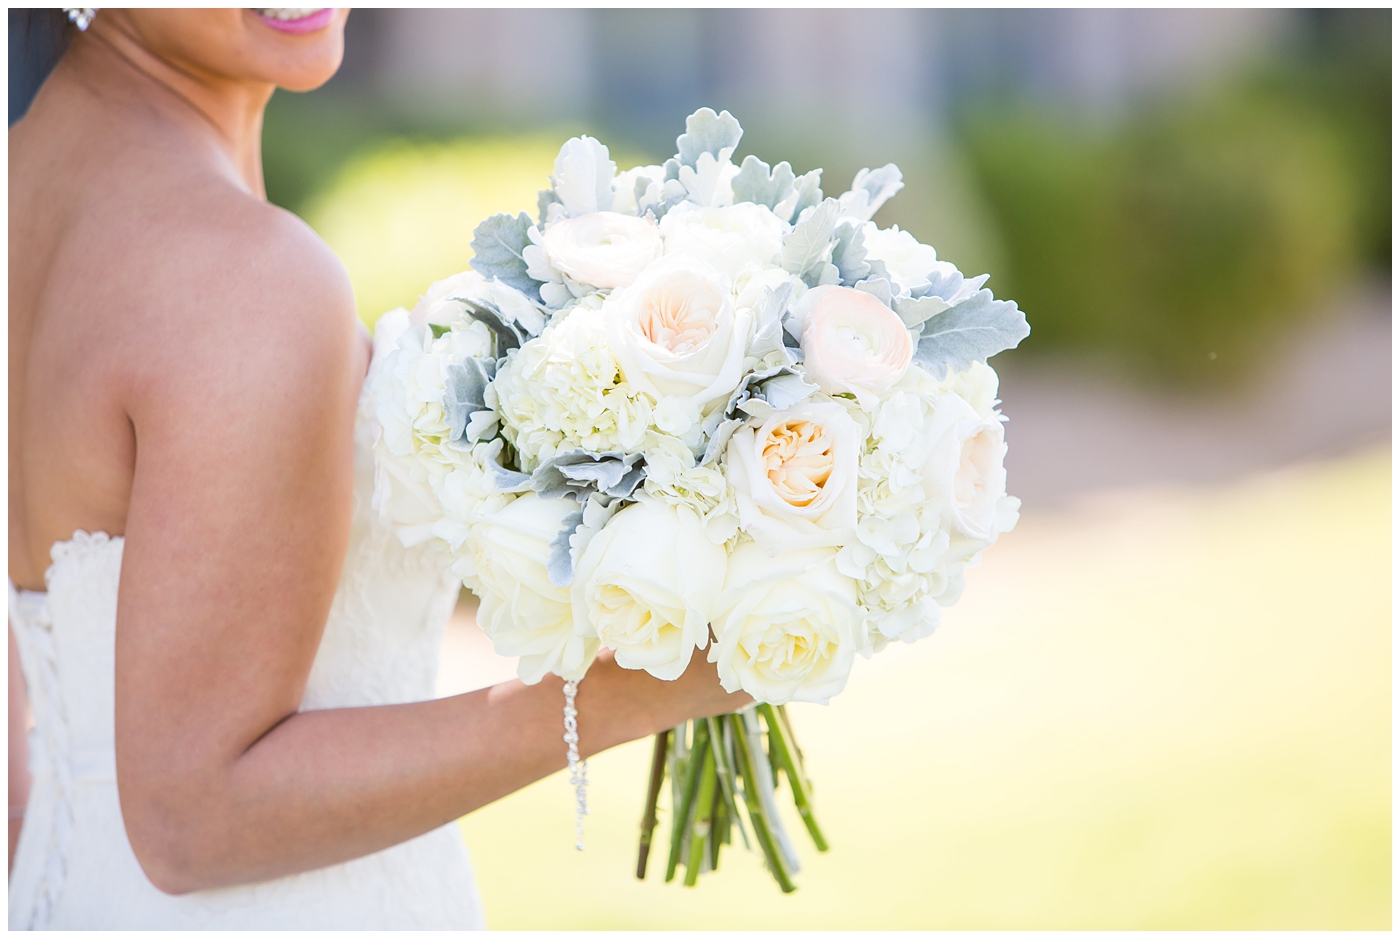 bride's wedding bouquet with soft white and pink roses, peonies, hydrangeas and greenery 